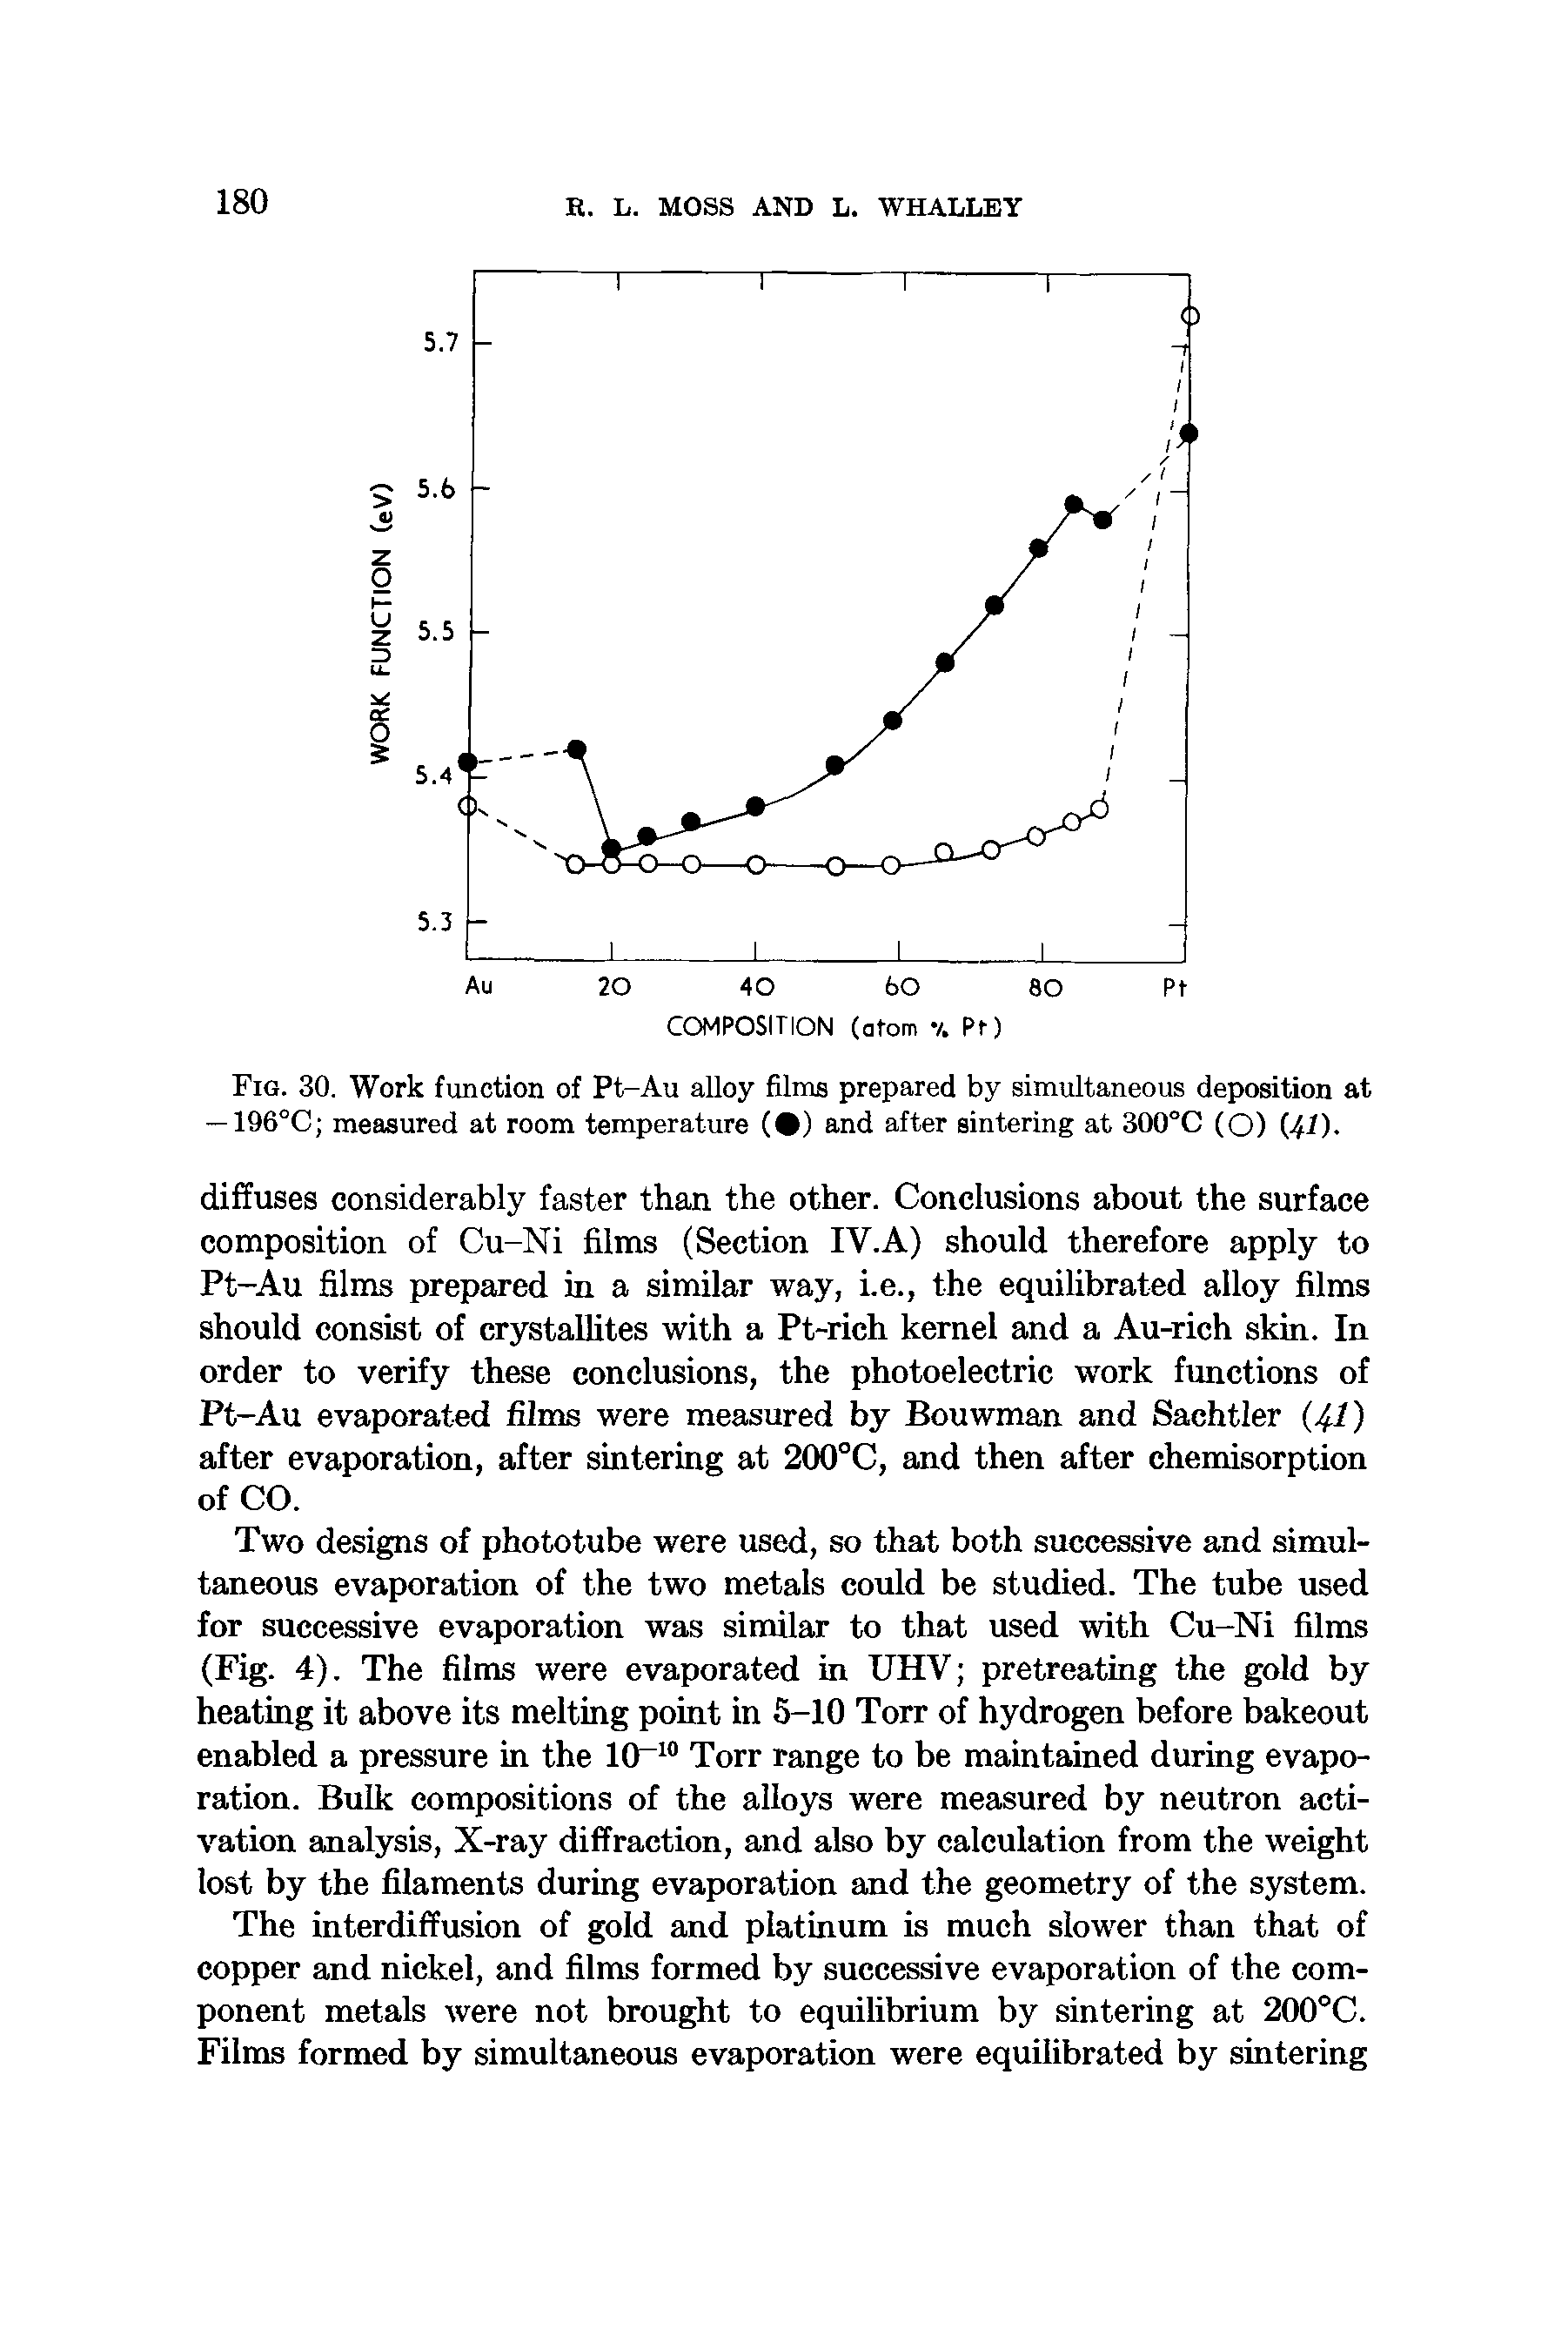 Fig. 30. Work function of Pt-Au alloy films prepared by simultaneous deposition at — 196°C measured at room temperature ( ) and after sintering at 300°C (O) (41).